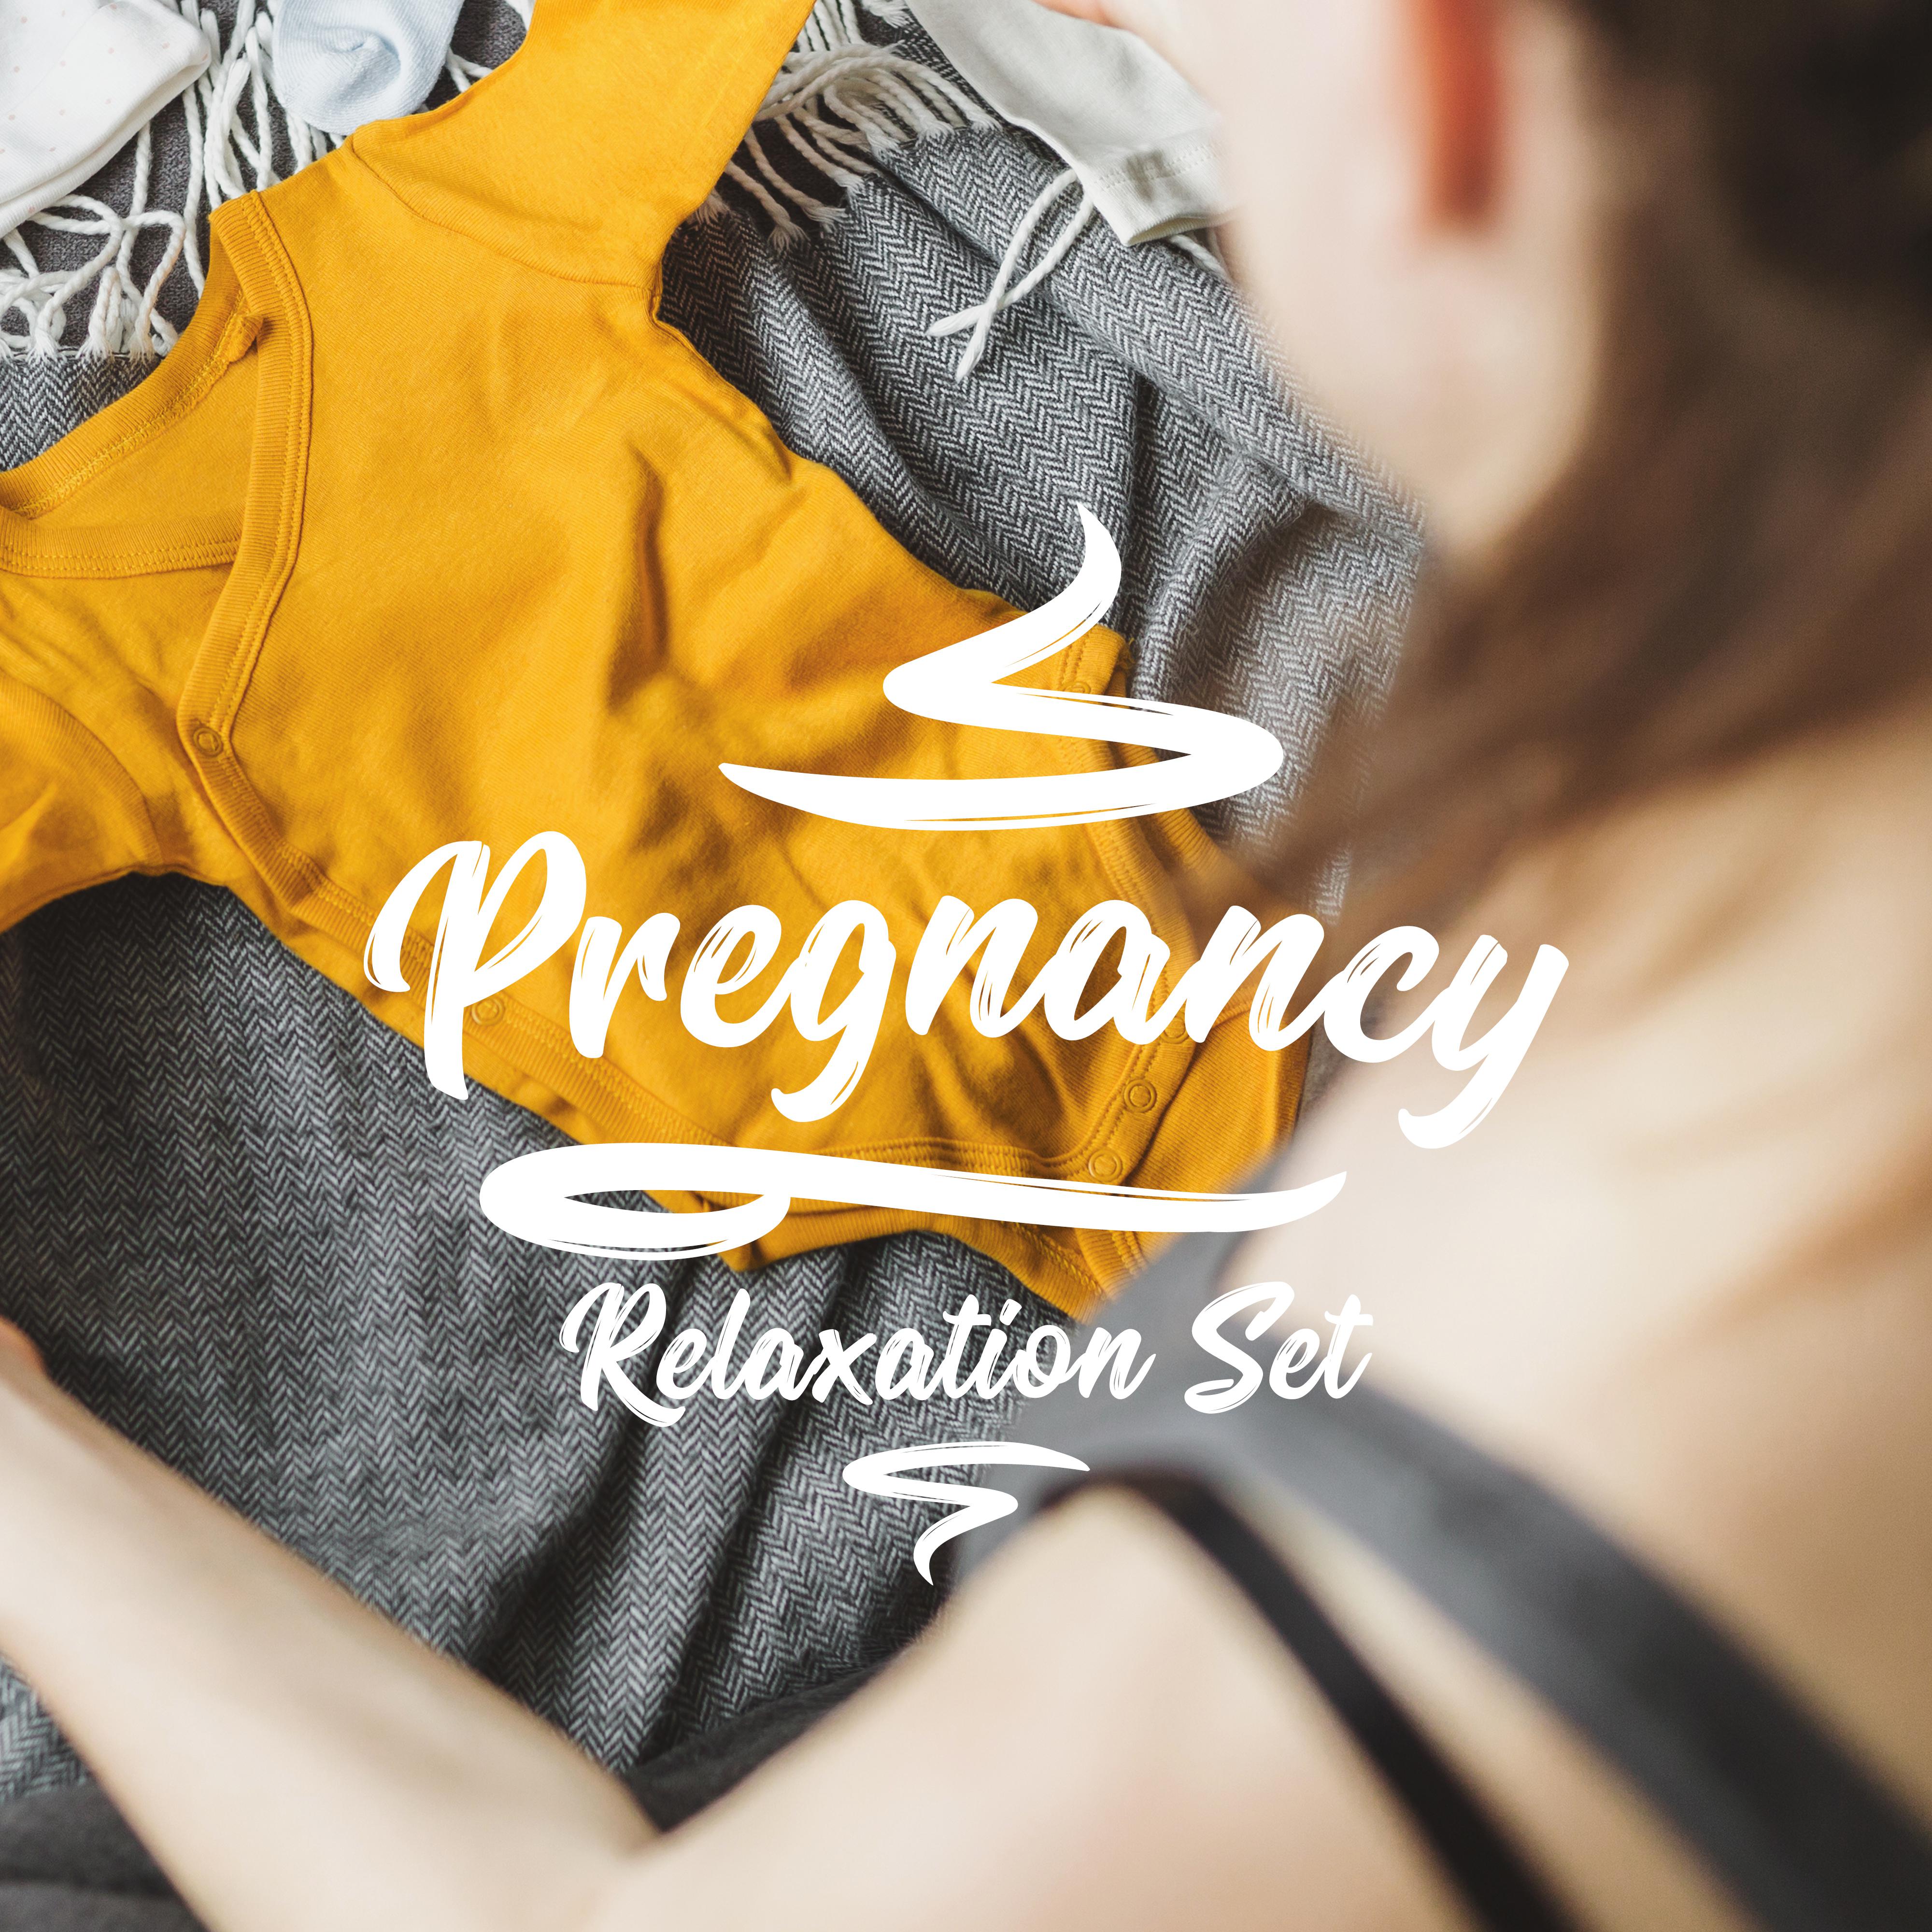 Pregnancy Relaxation Set: Calming Sounds for Sleep, Rest, Deep Meditation, Inner Harmony, Chillout Zone, Relaxing Vibes, Pregnancy Music 2019